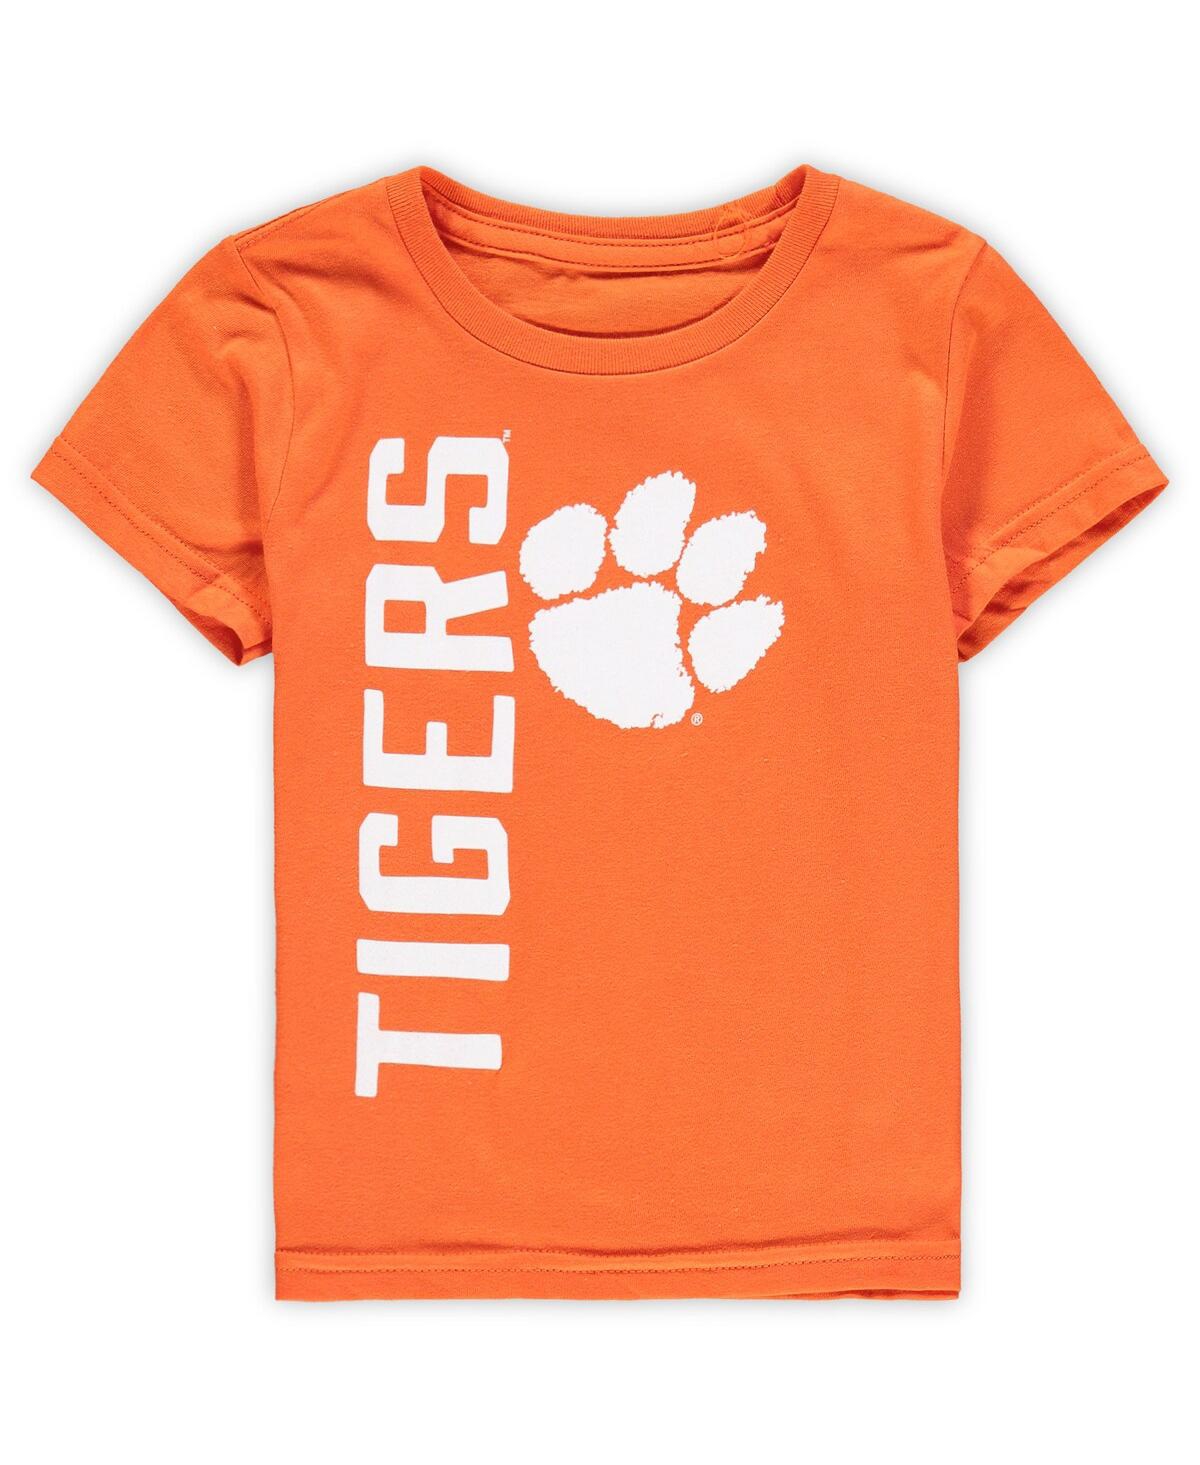 OUTERSTUFF TODDLER BOYS AND GIRLS ORANGE CLEMSON TIGERS BIG AND BOLD T-SHIRT